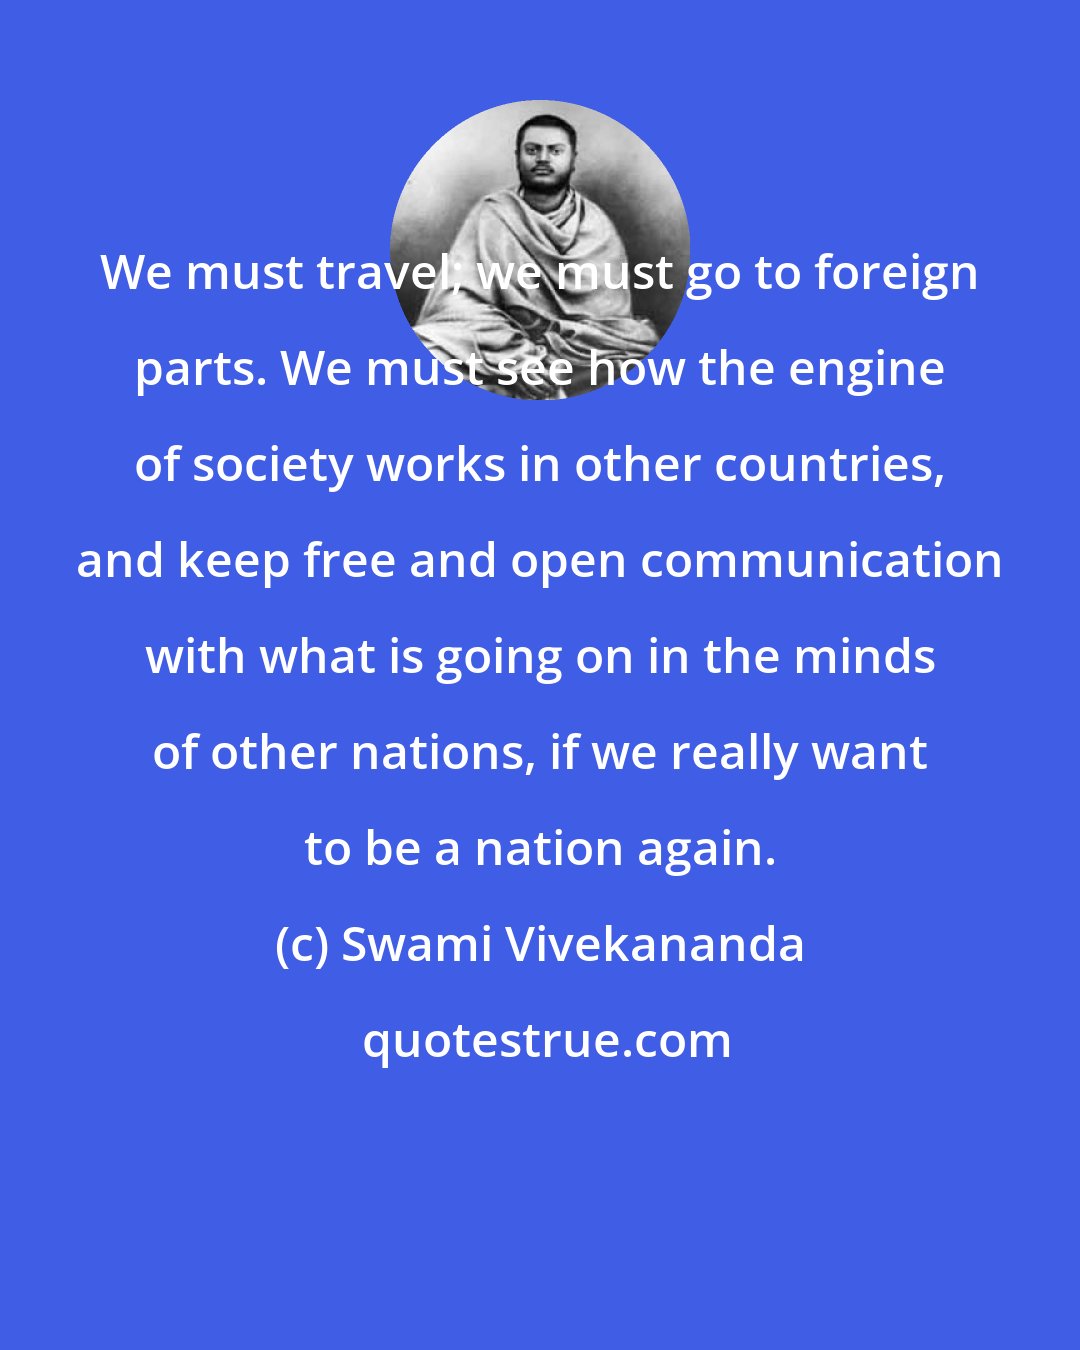 Swami Vivekananda: We must travel; we must go to foreign parts. We must see how the engine of society works in other countries, and keep free and open communication with what is going on in the minds of other nations, if we really want to be a nation again.